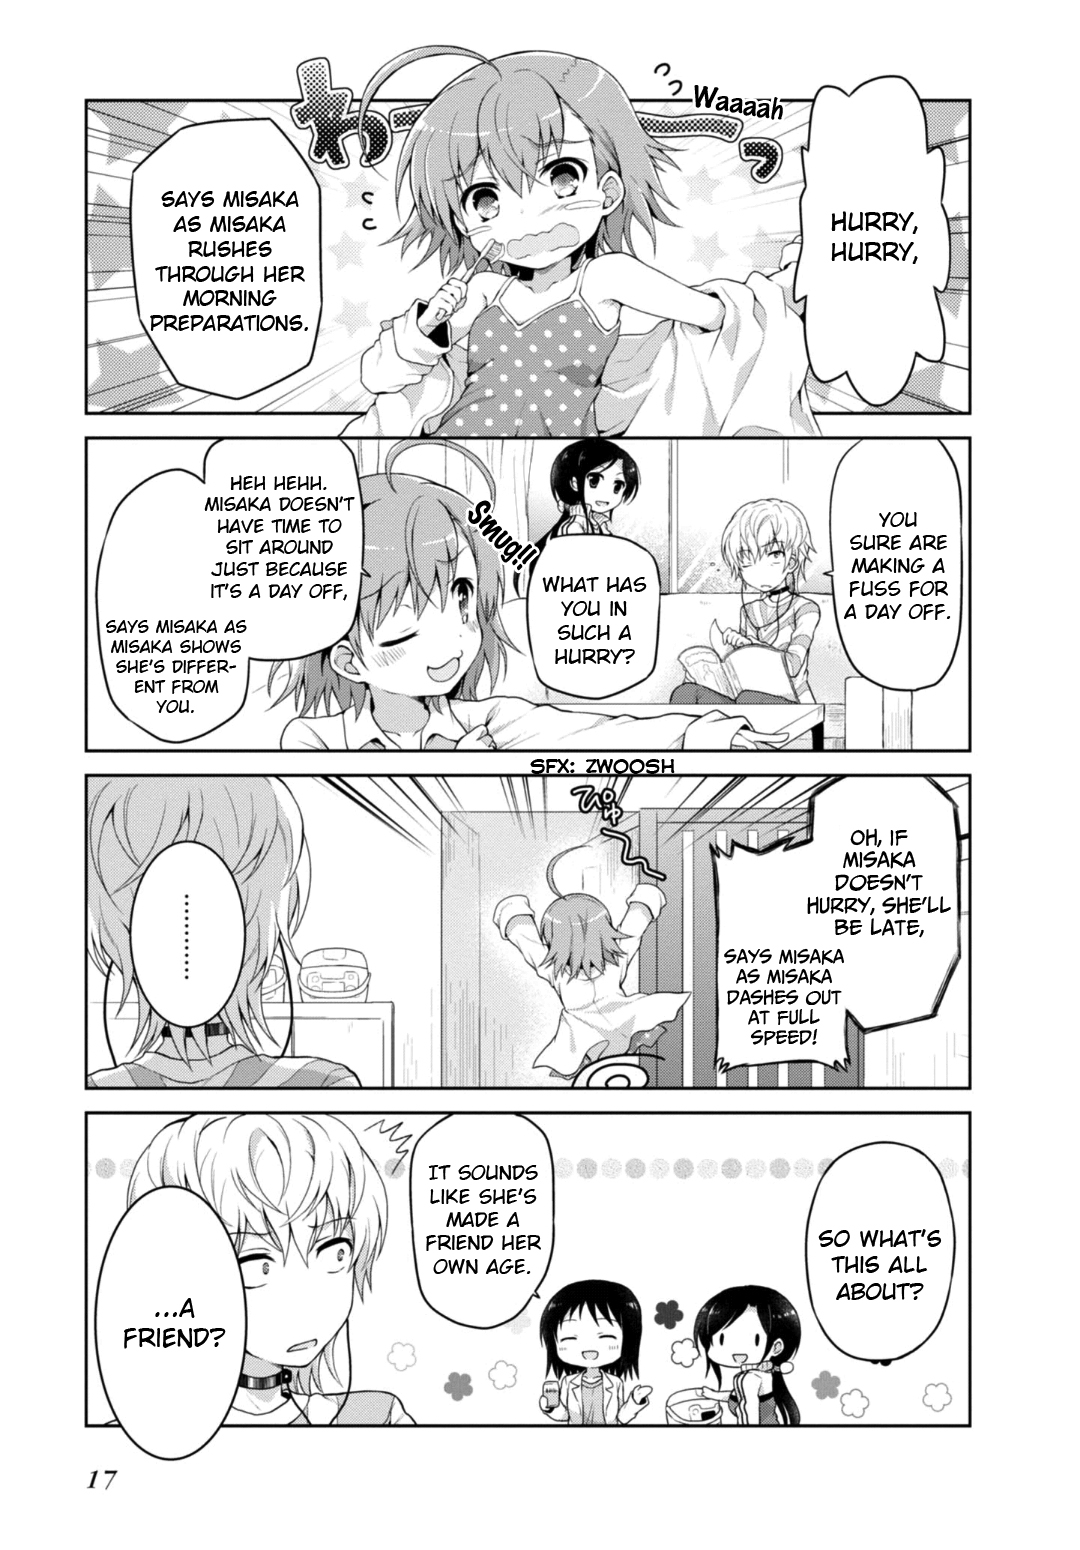 A Certain Idol Accelerator - Page 1